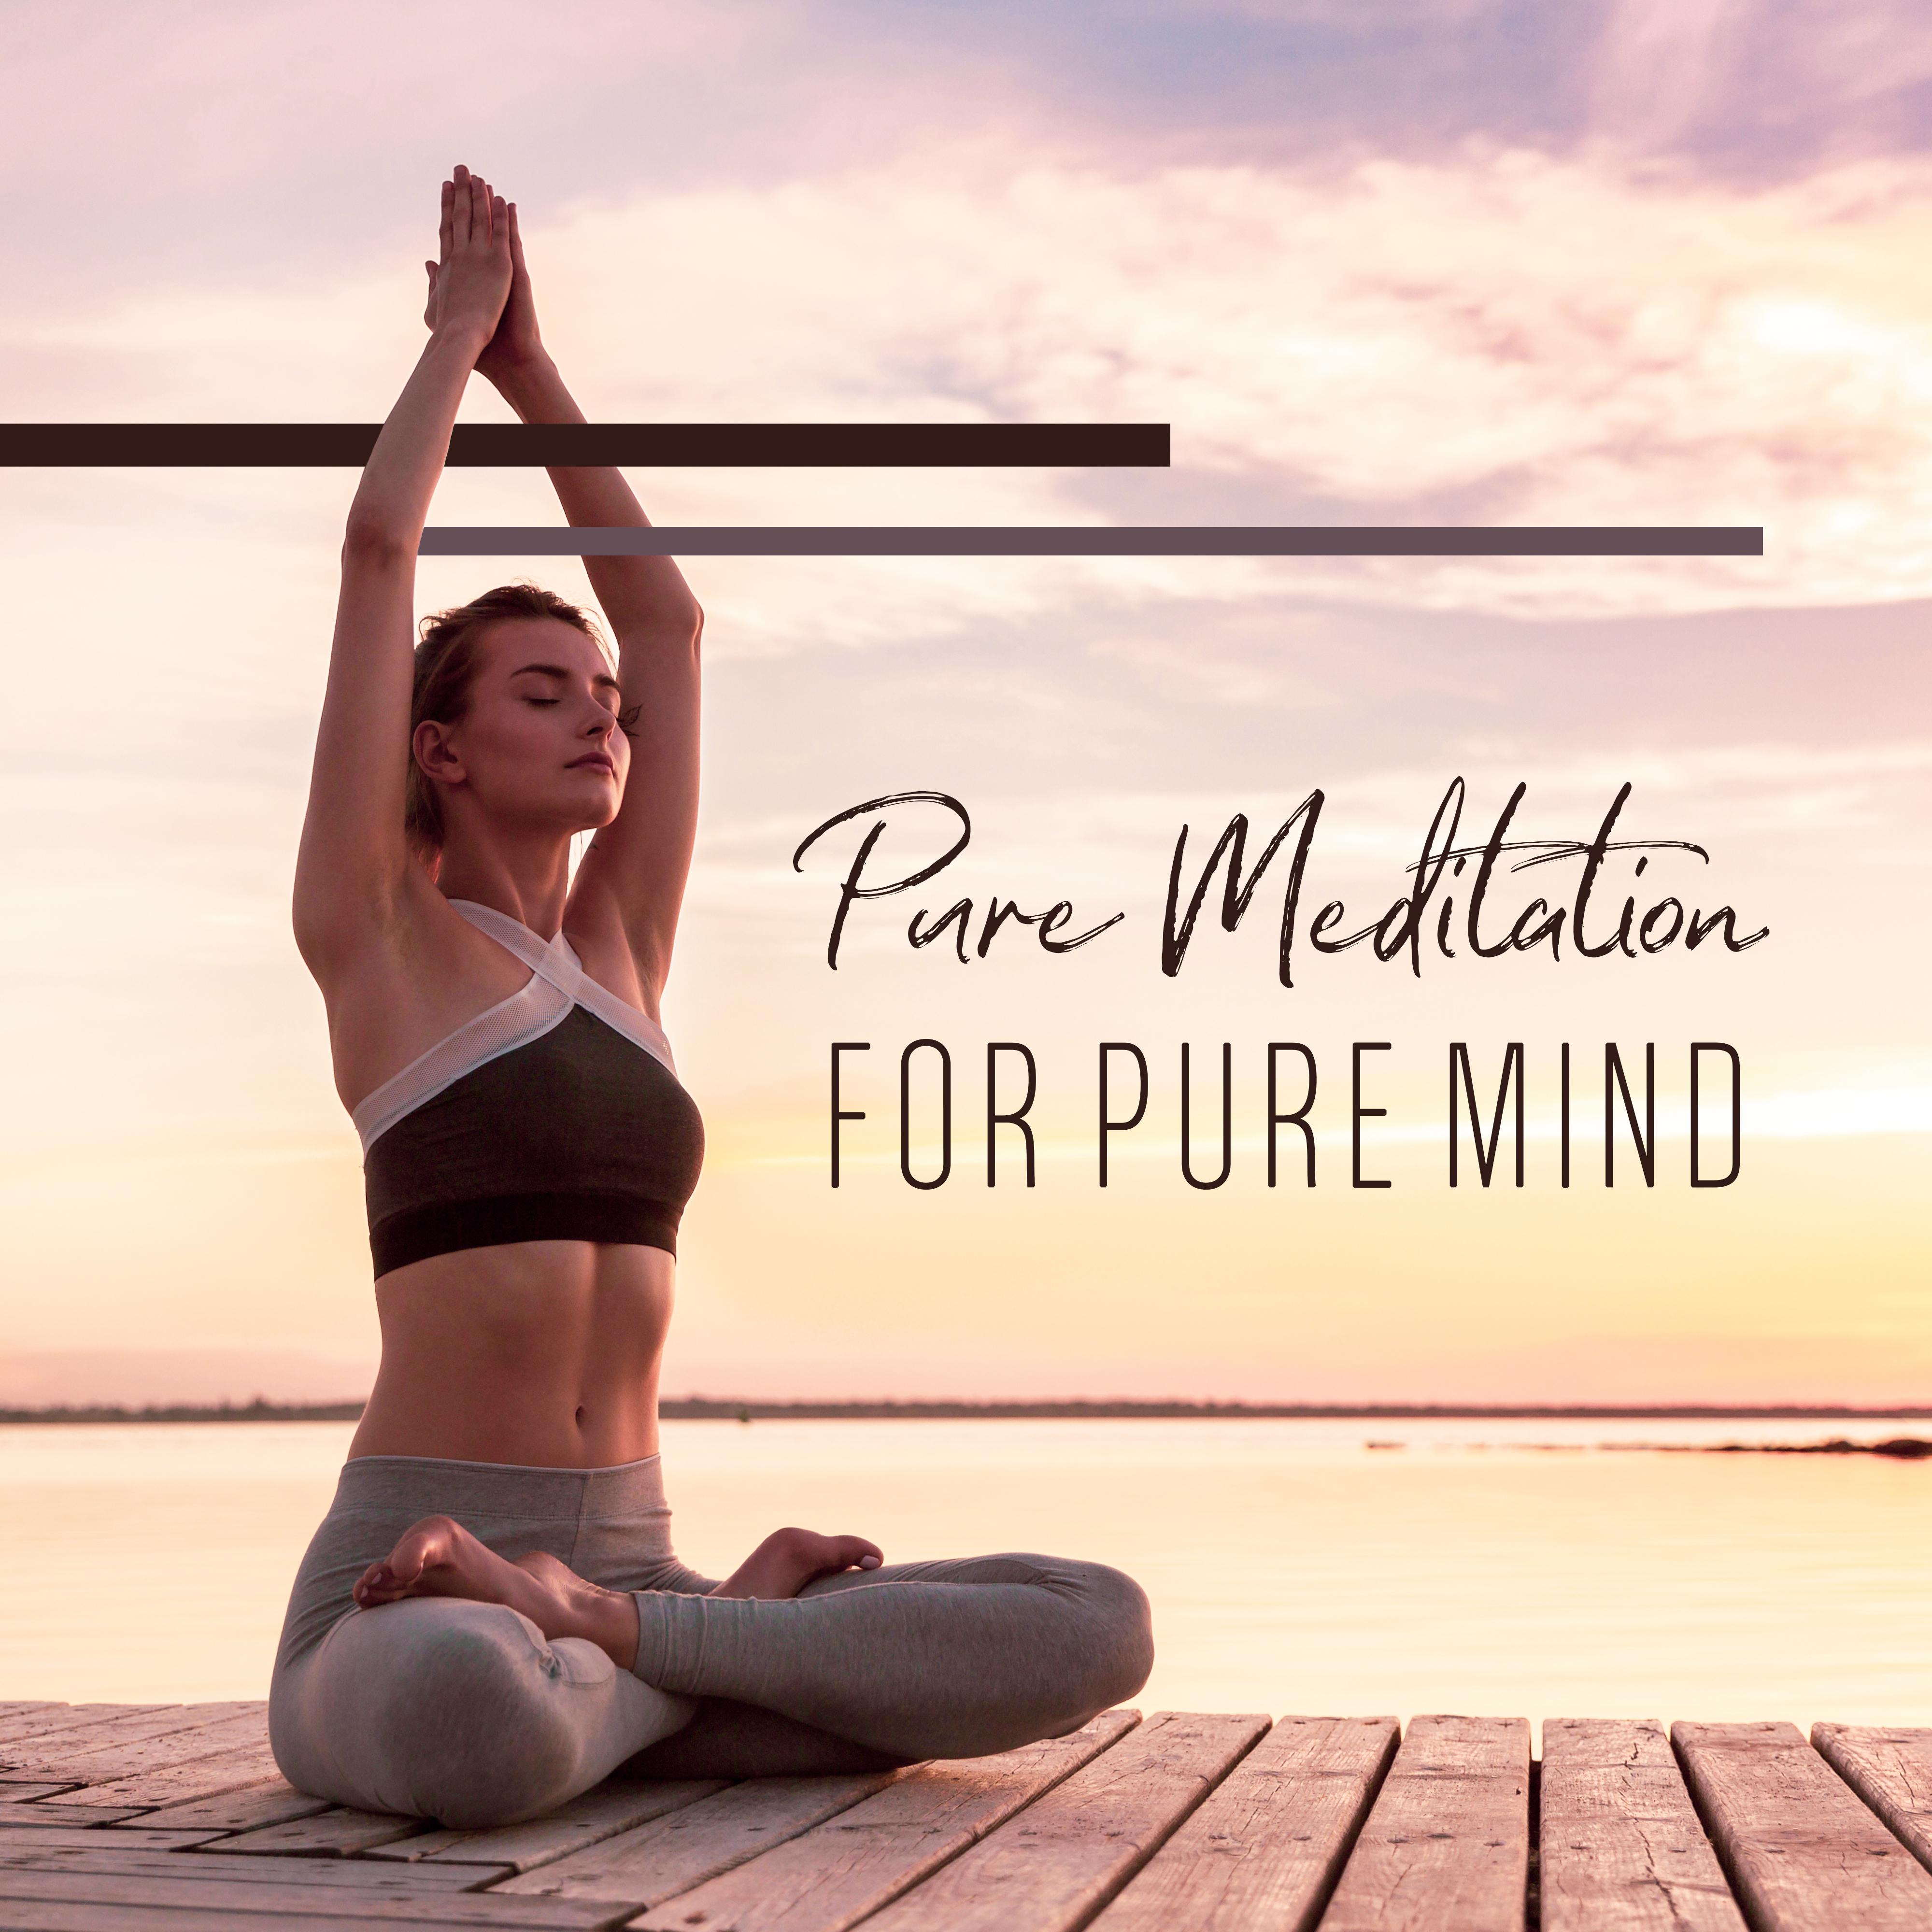 Pure Meditation for Pure Mind: Meditation Music Zone, Inner Balance, Deep Meditation, Peaceful Tunes for Yoga, Relaxing Sounds